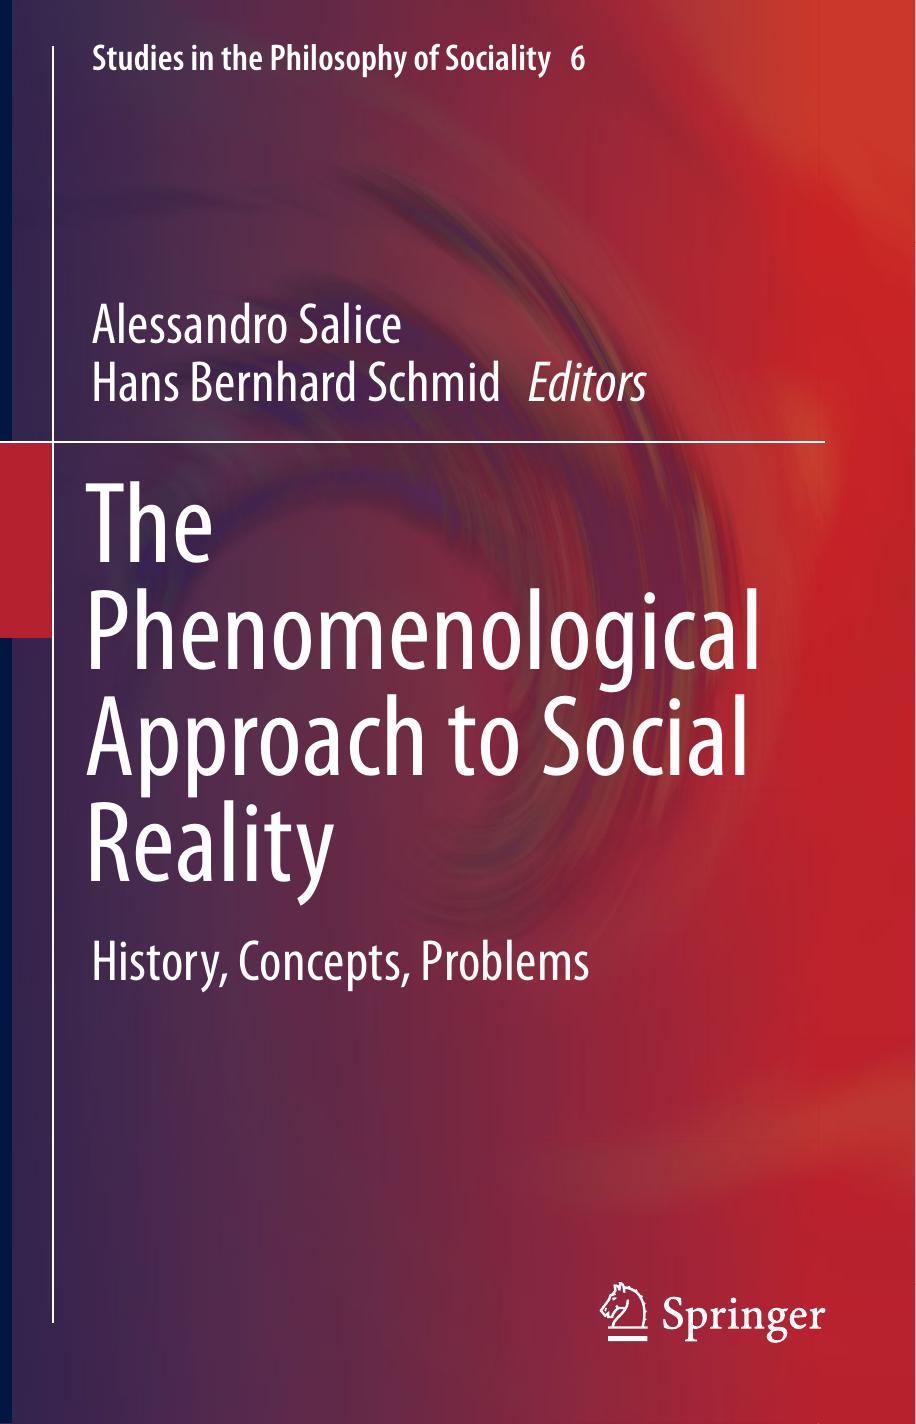 The Phenomenological Approach to Social Reality, History, Concepts, Problems, 2016